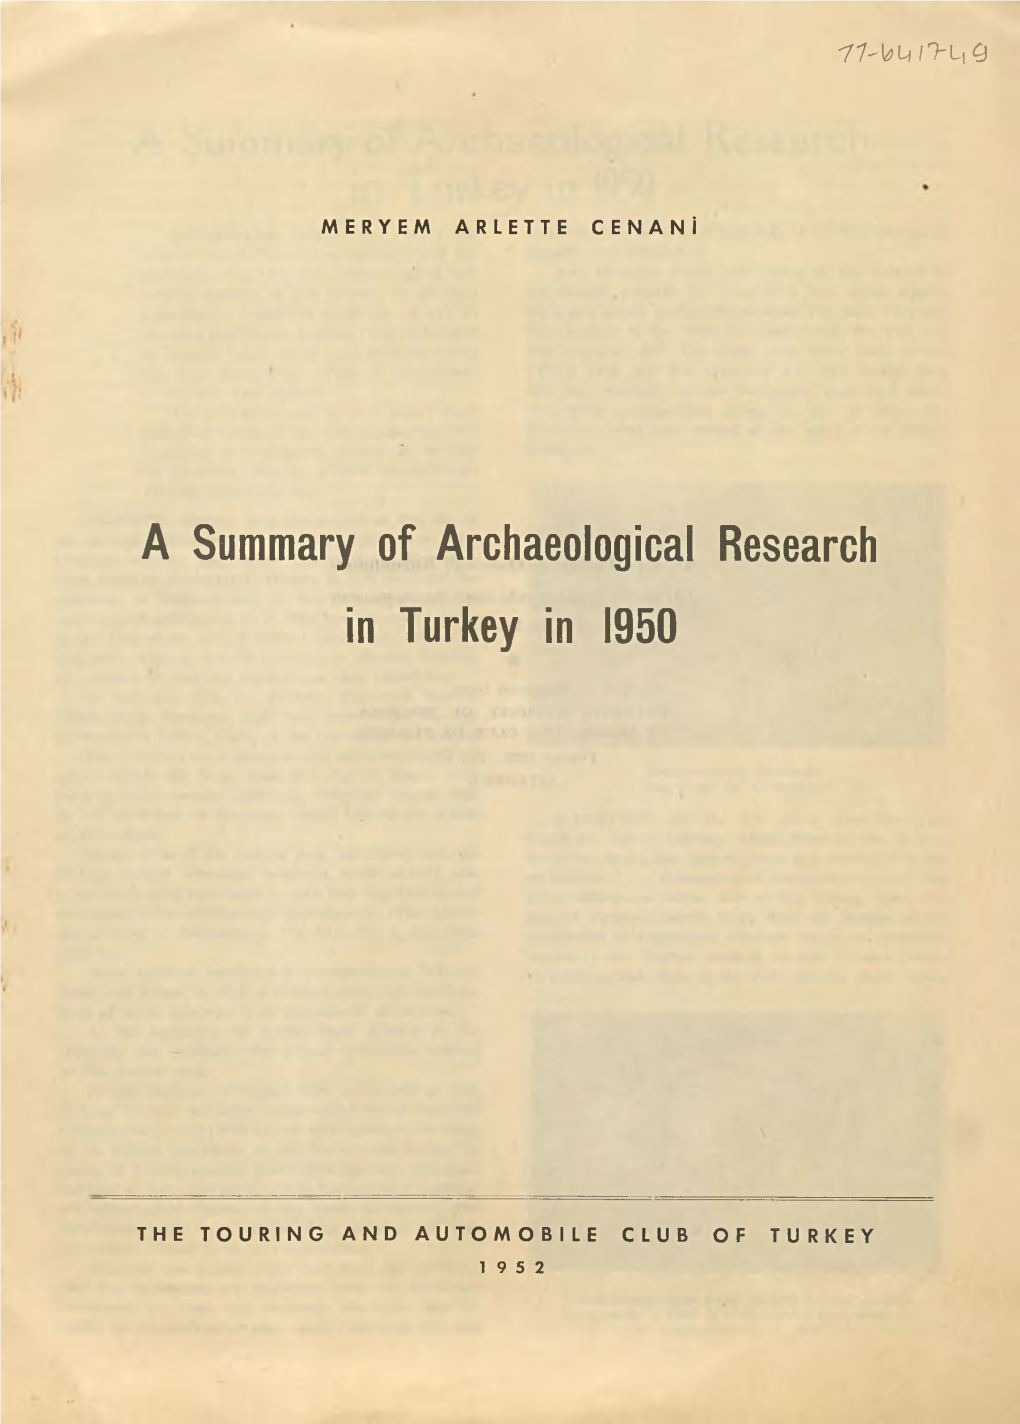 A Summary of Archaeological Research in Turkey in 1950